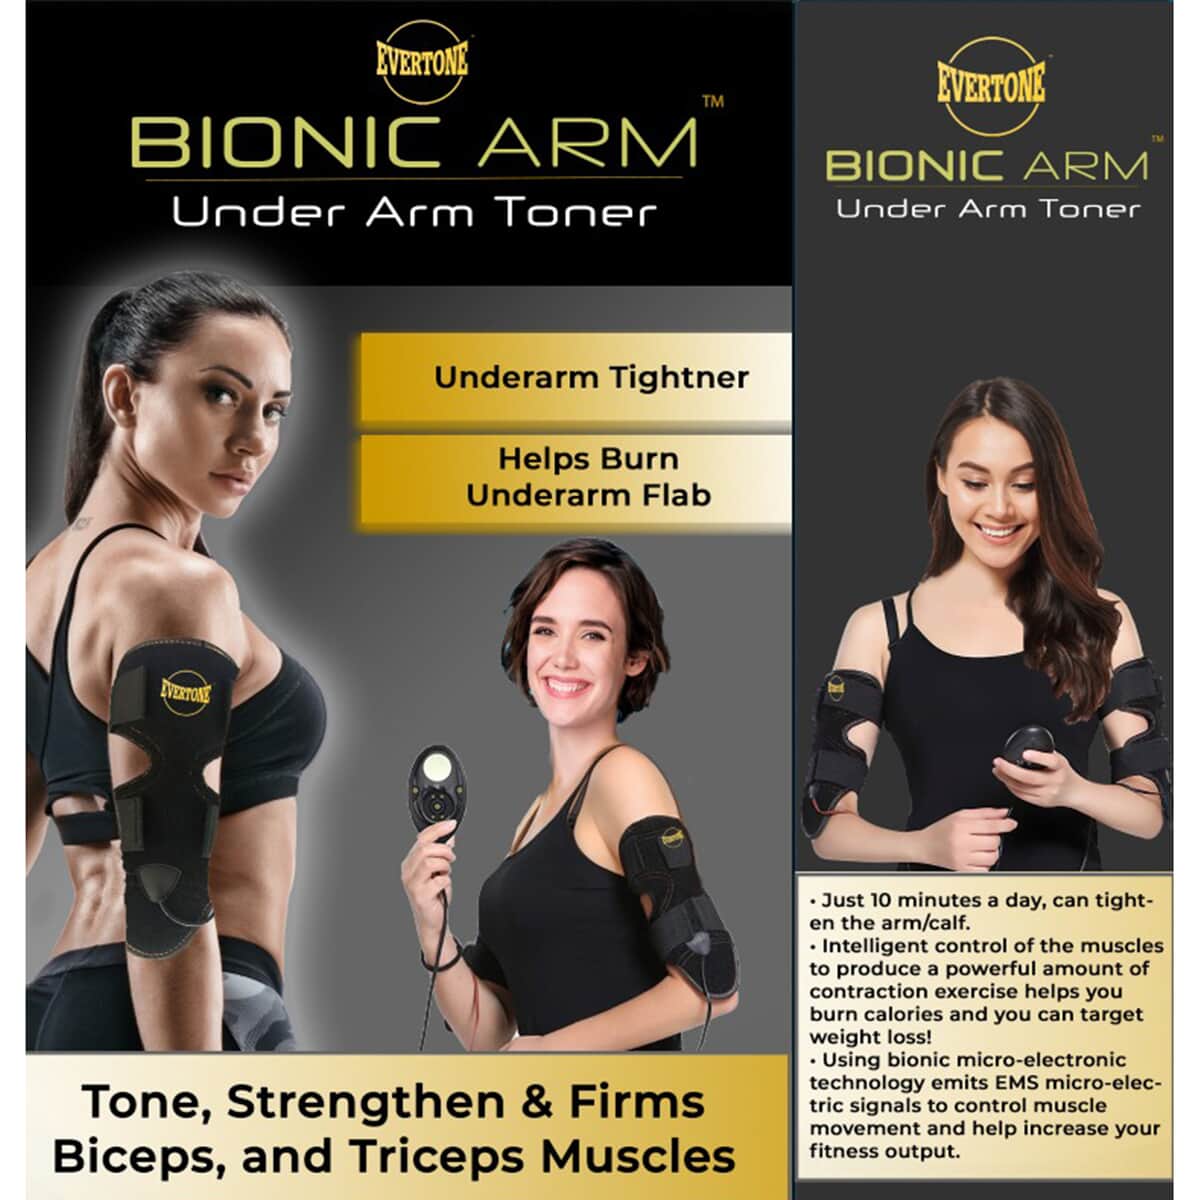 Evertone Bionic Arm Under Arm Toner, Rechargeable Remote Controlled Arm Toner With 10 Training Modes image number 5